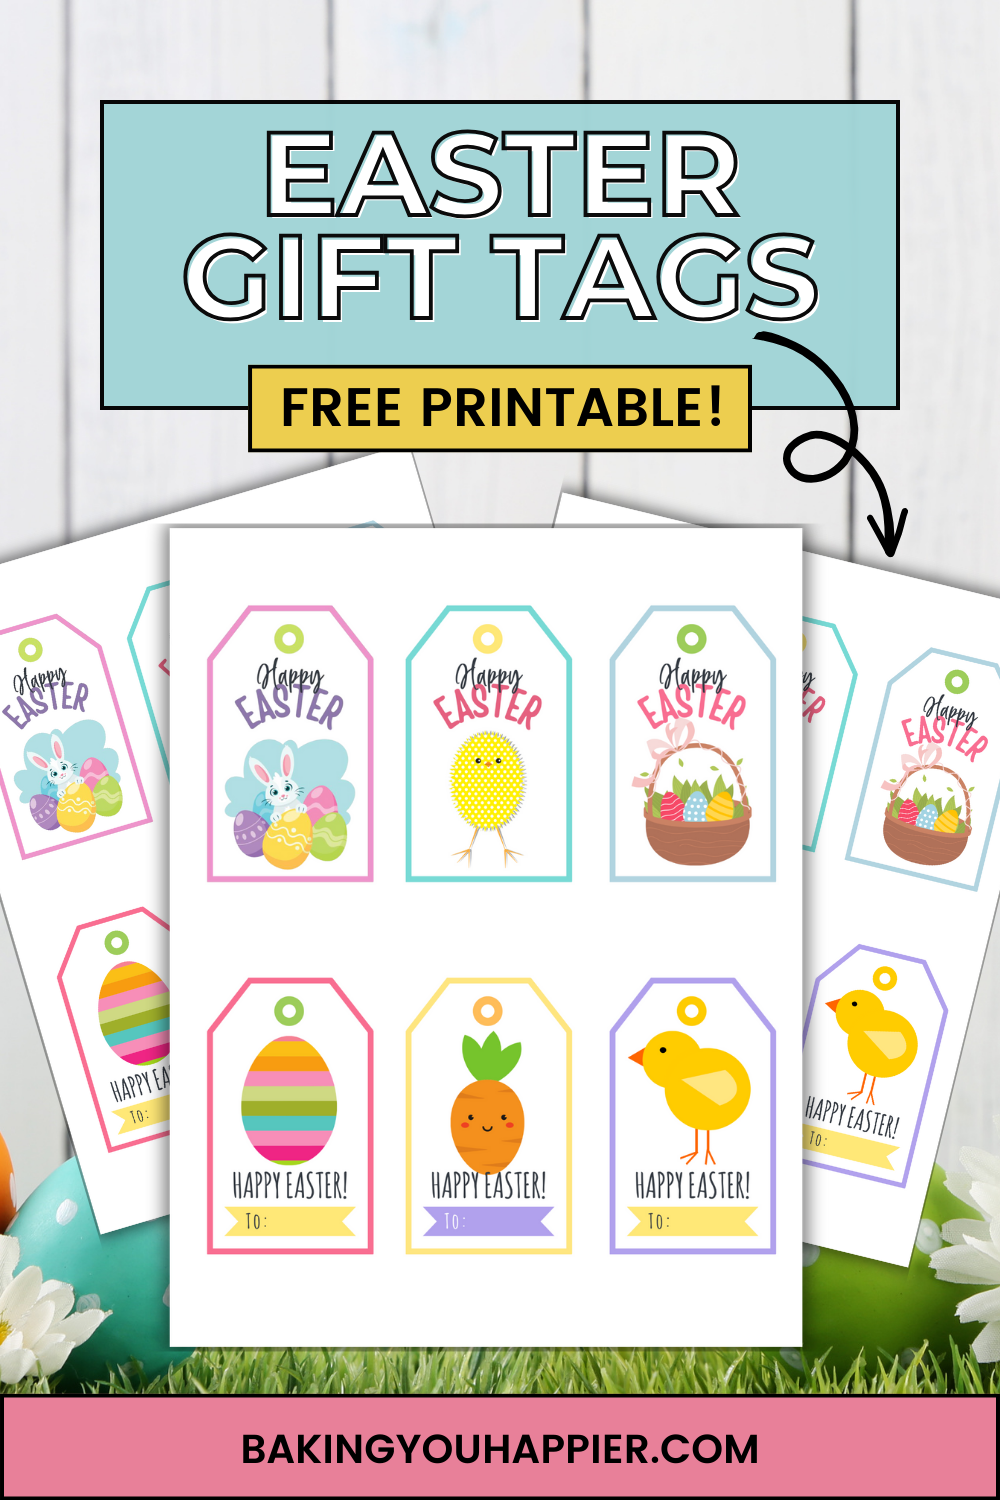 Free Printable Easter Gift Tags Baking You Happier